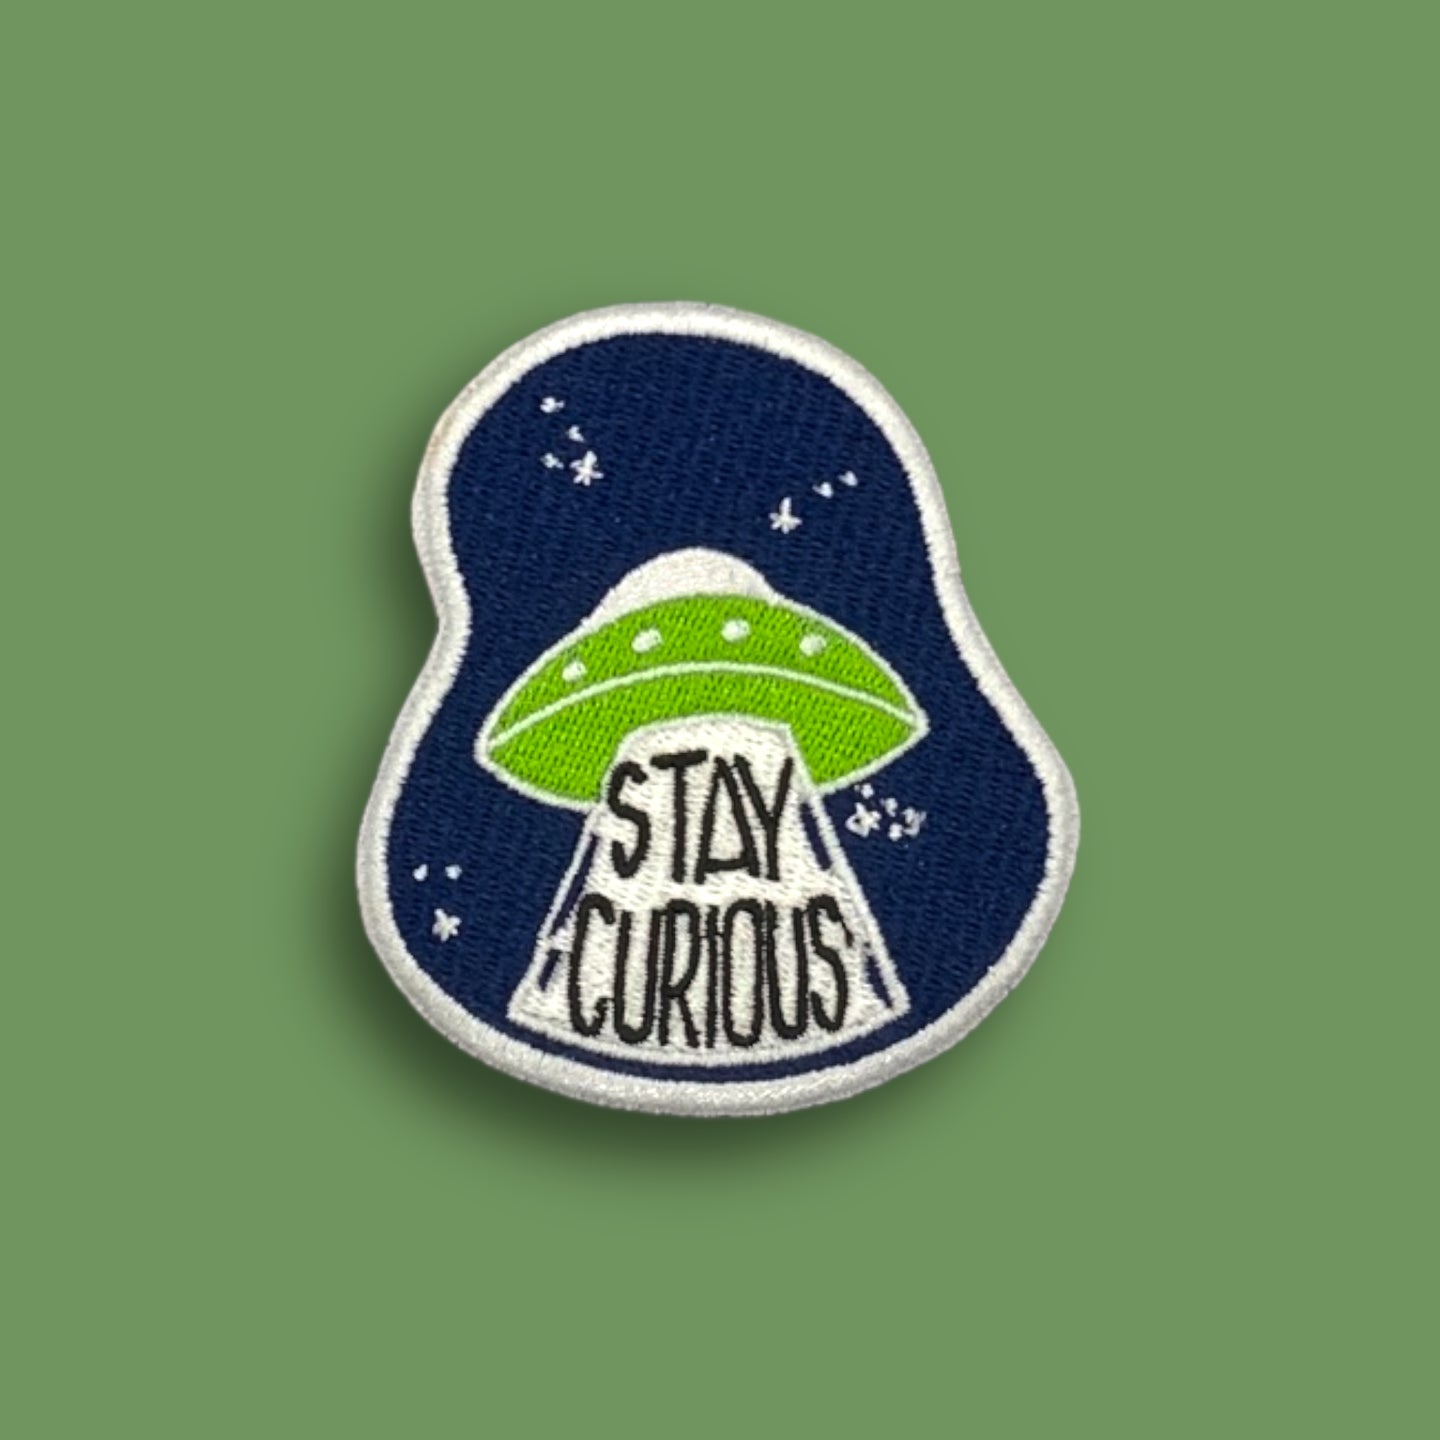 Stay Curious Patch